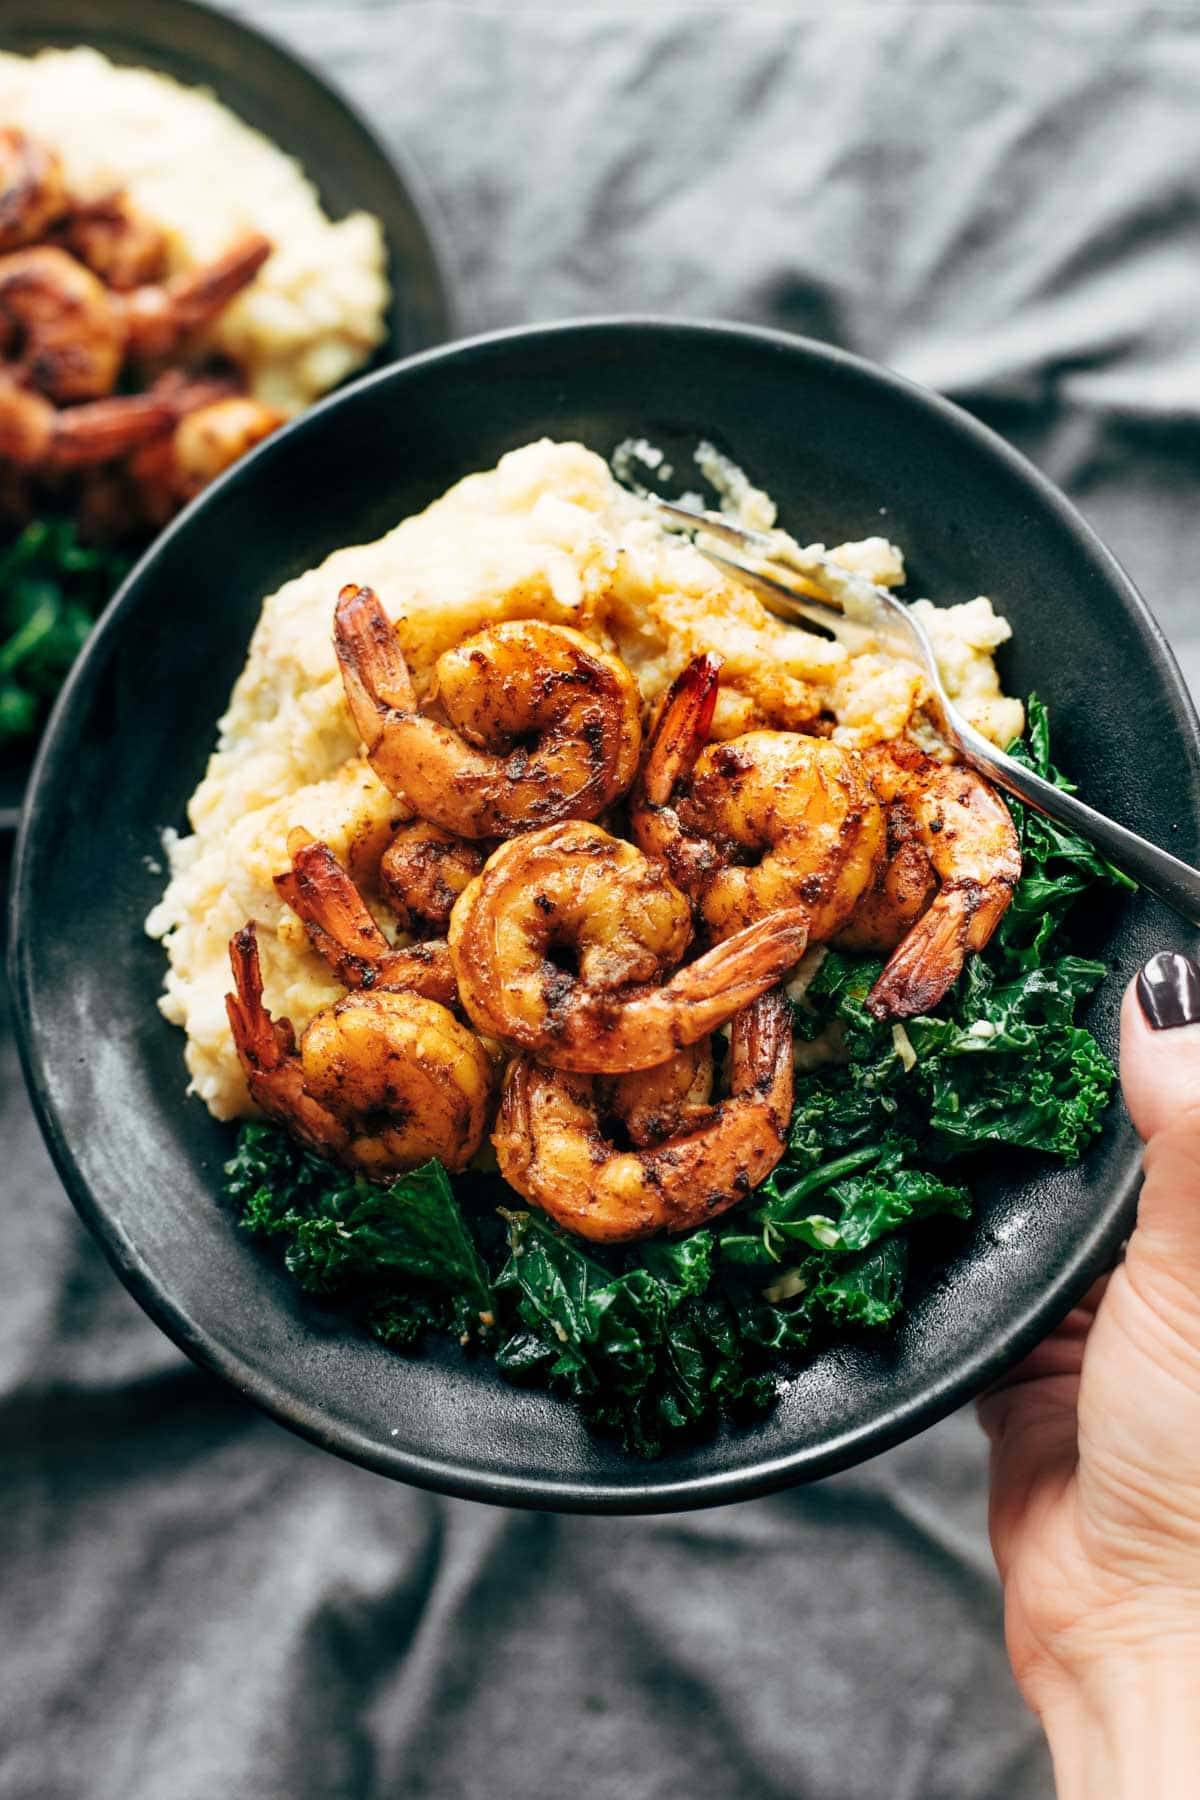 Spicy shrimp with cauliflower mash and kale on a plate.